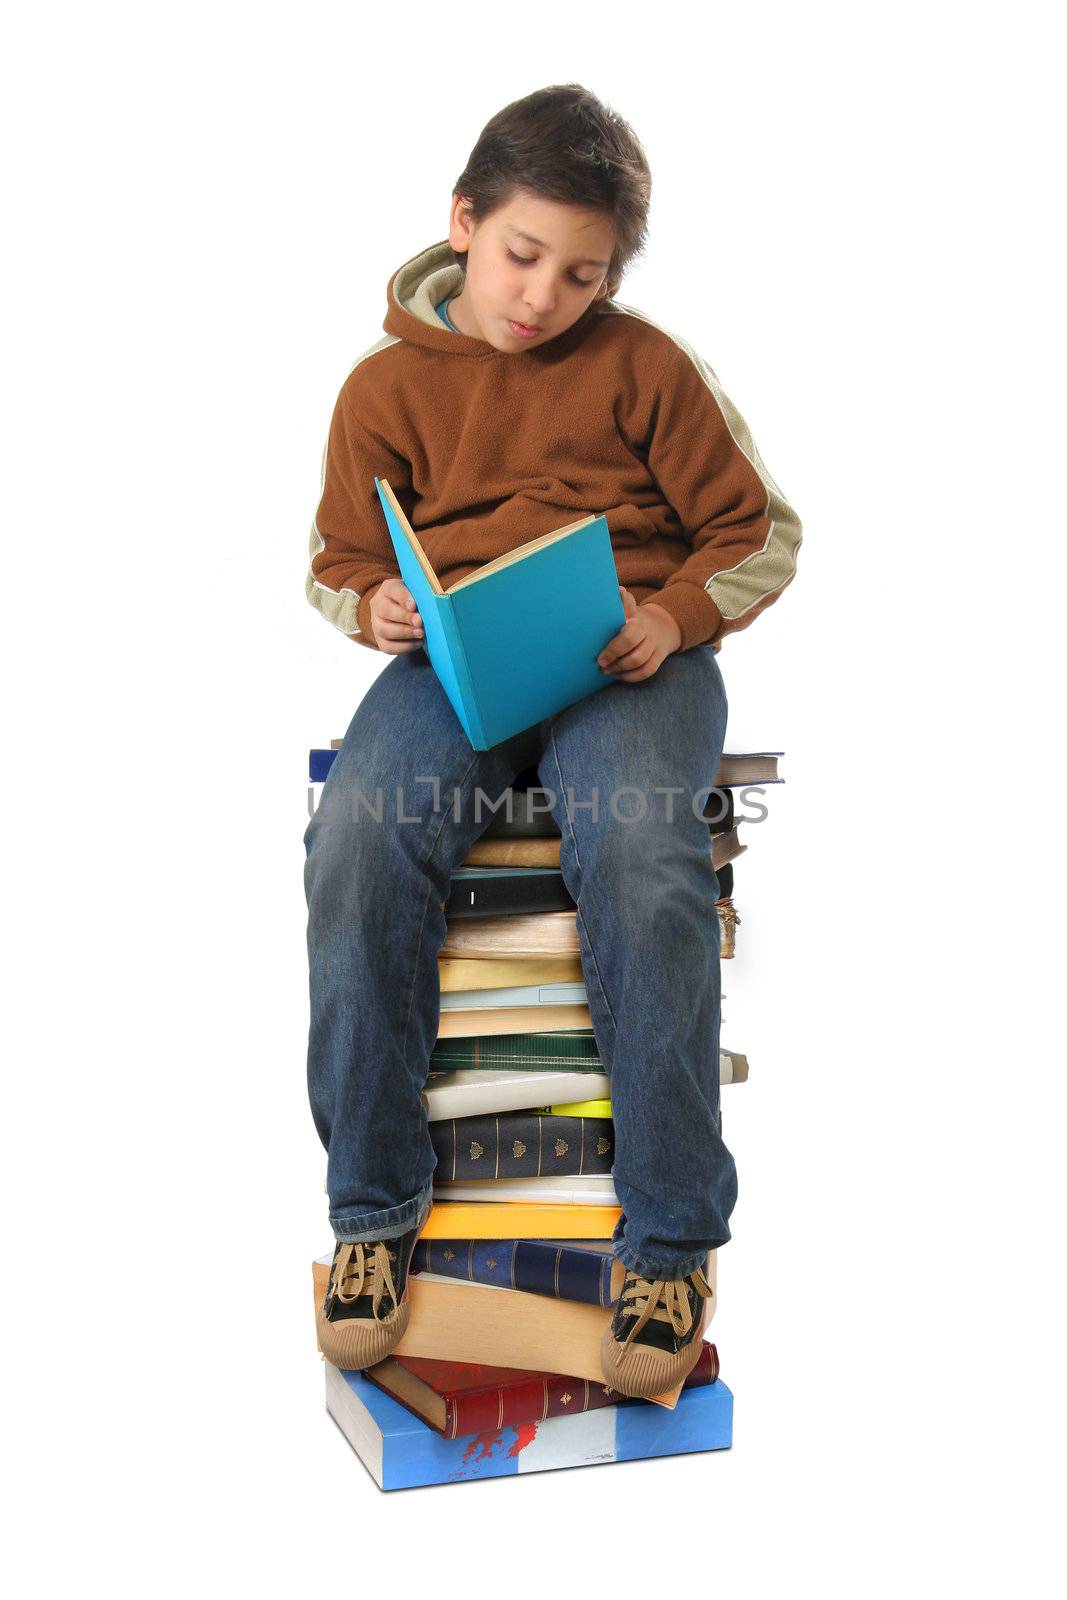 Student sitting on a pile of books by Erdosain